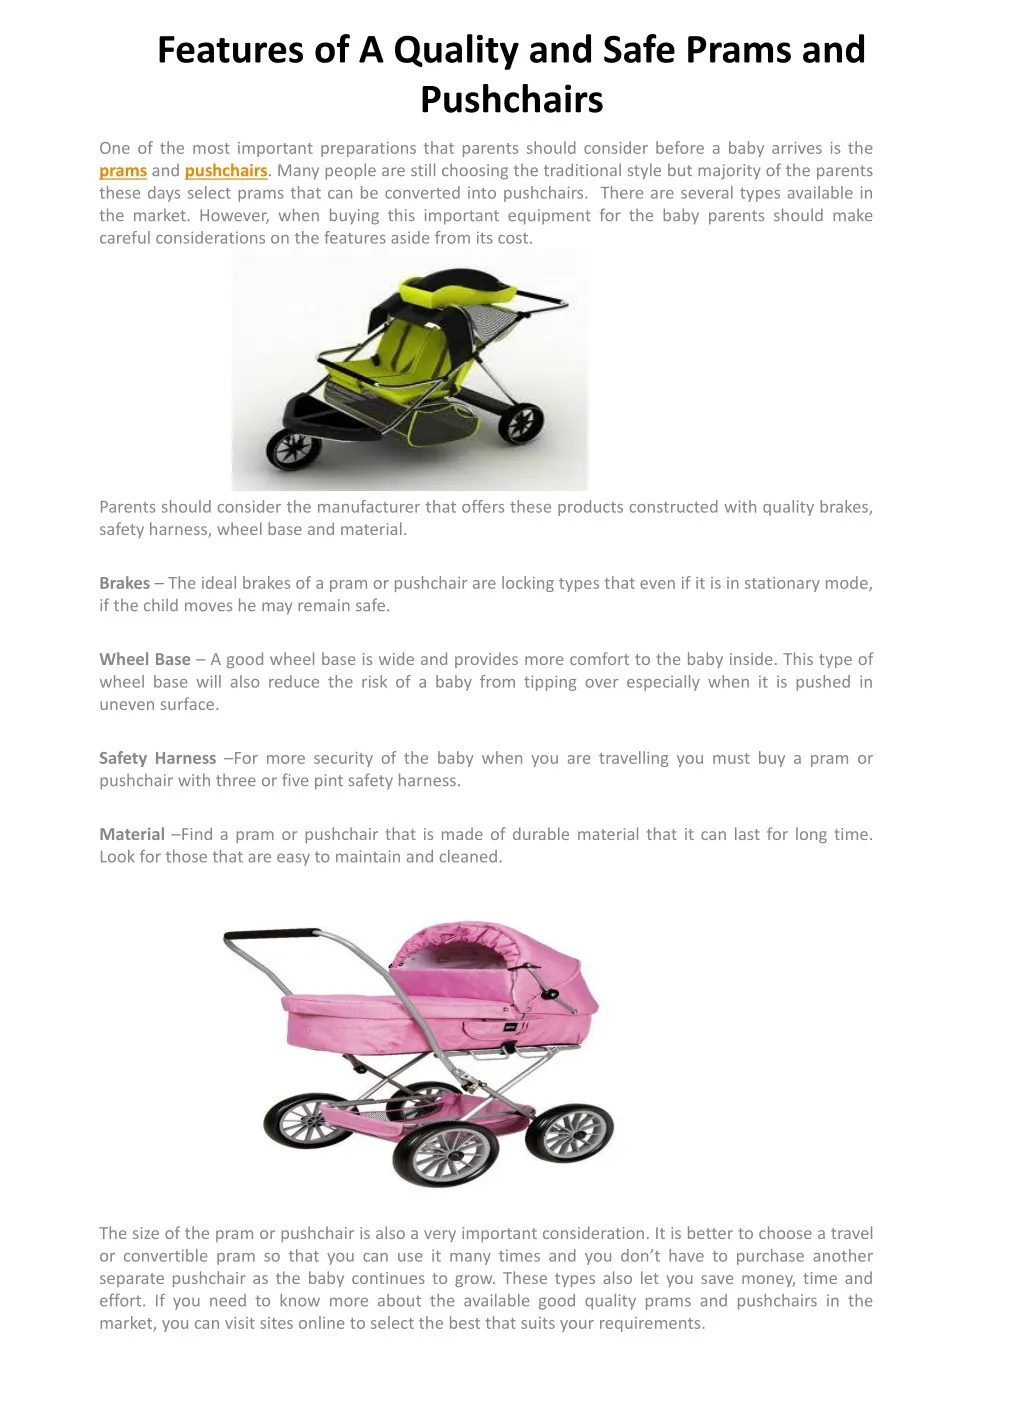 features of a quality and safe prams and pushchairs